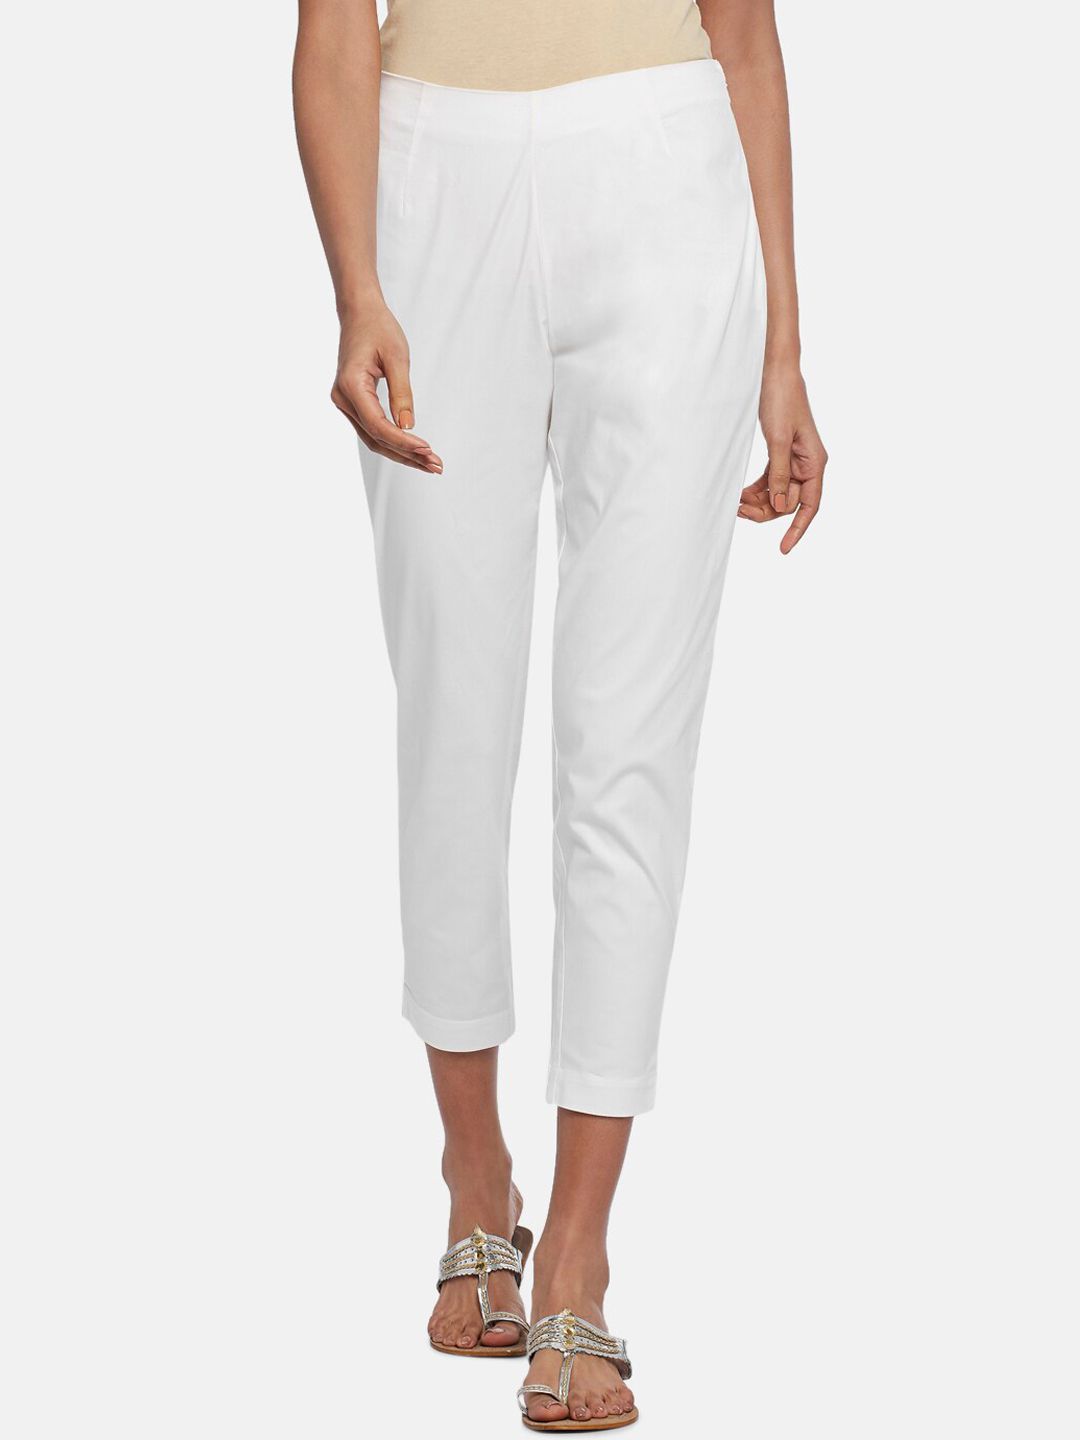 RANGMANCH BY PANTALOONS Women Off White Cotton Trousers Price in India